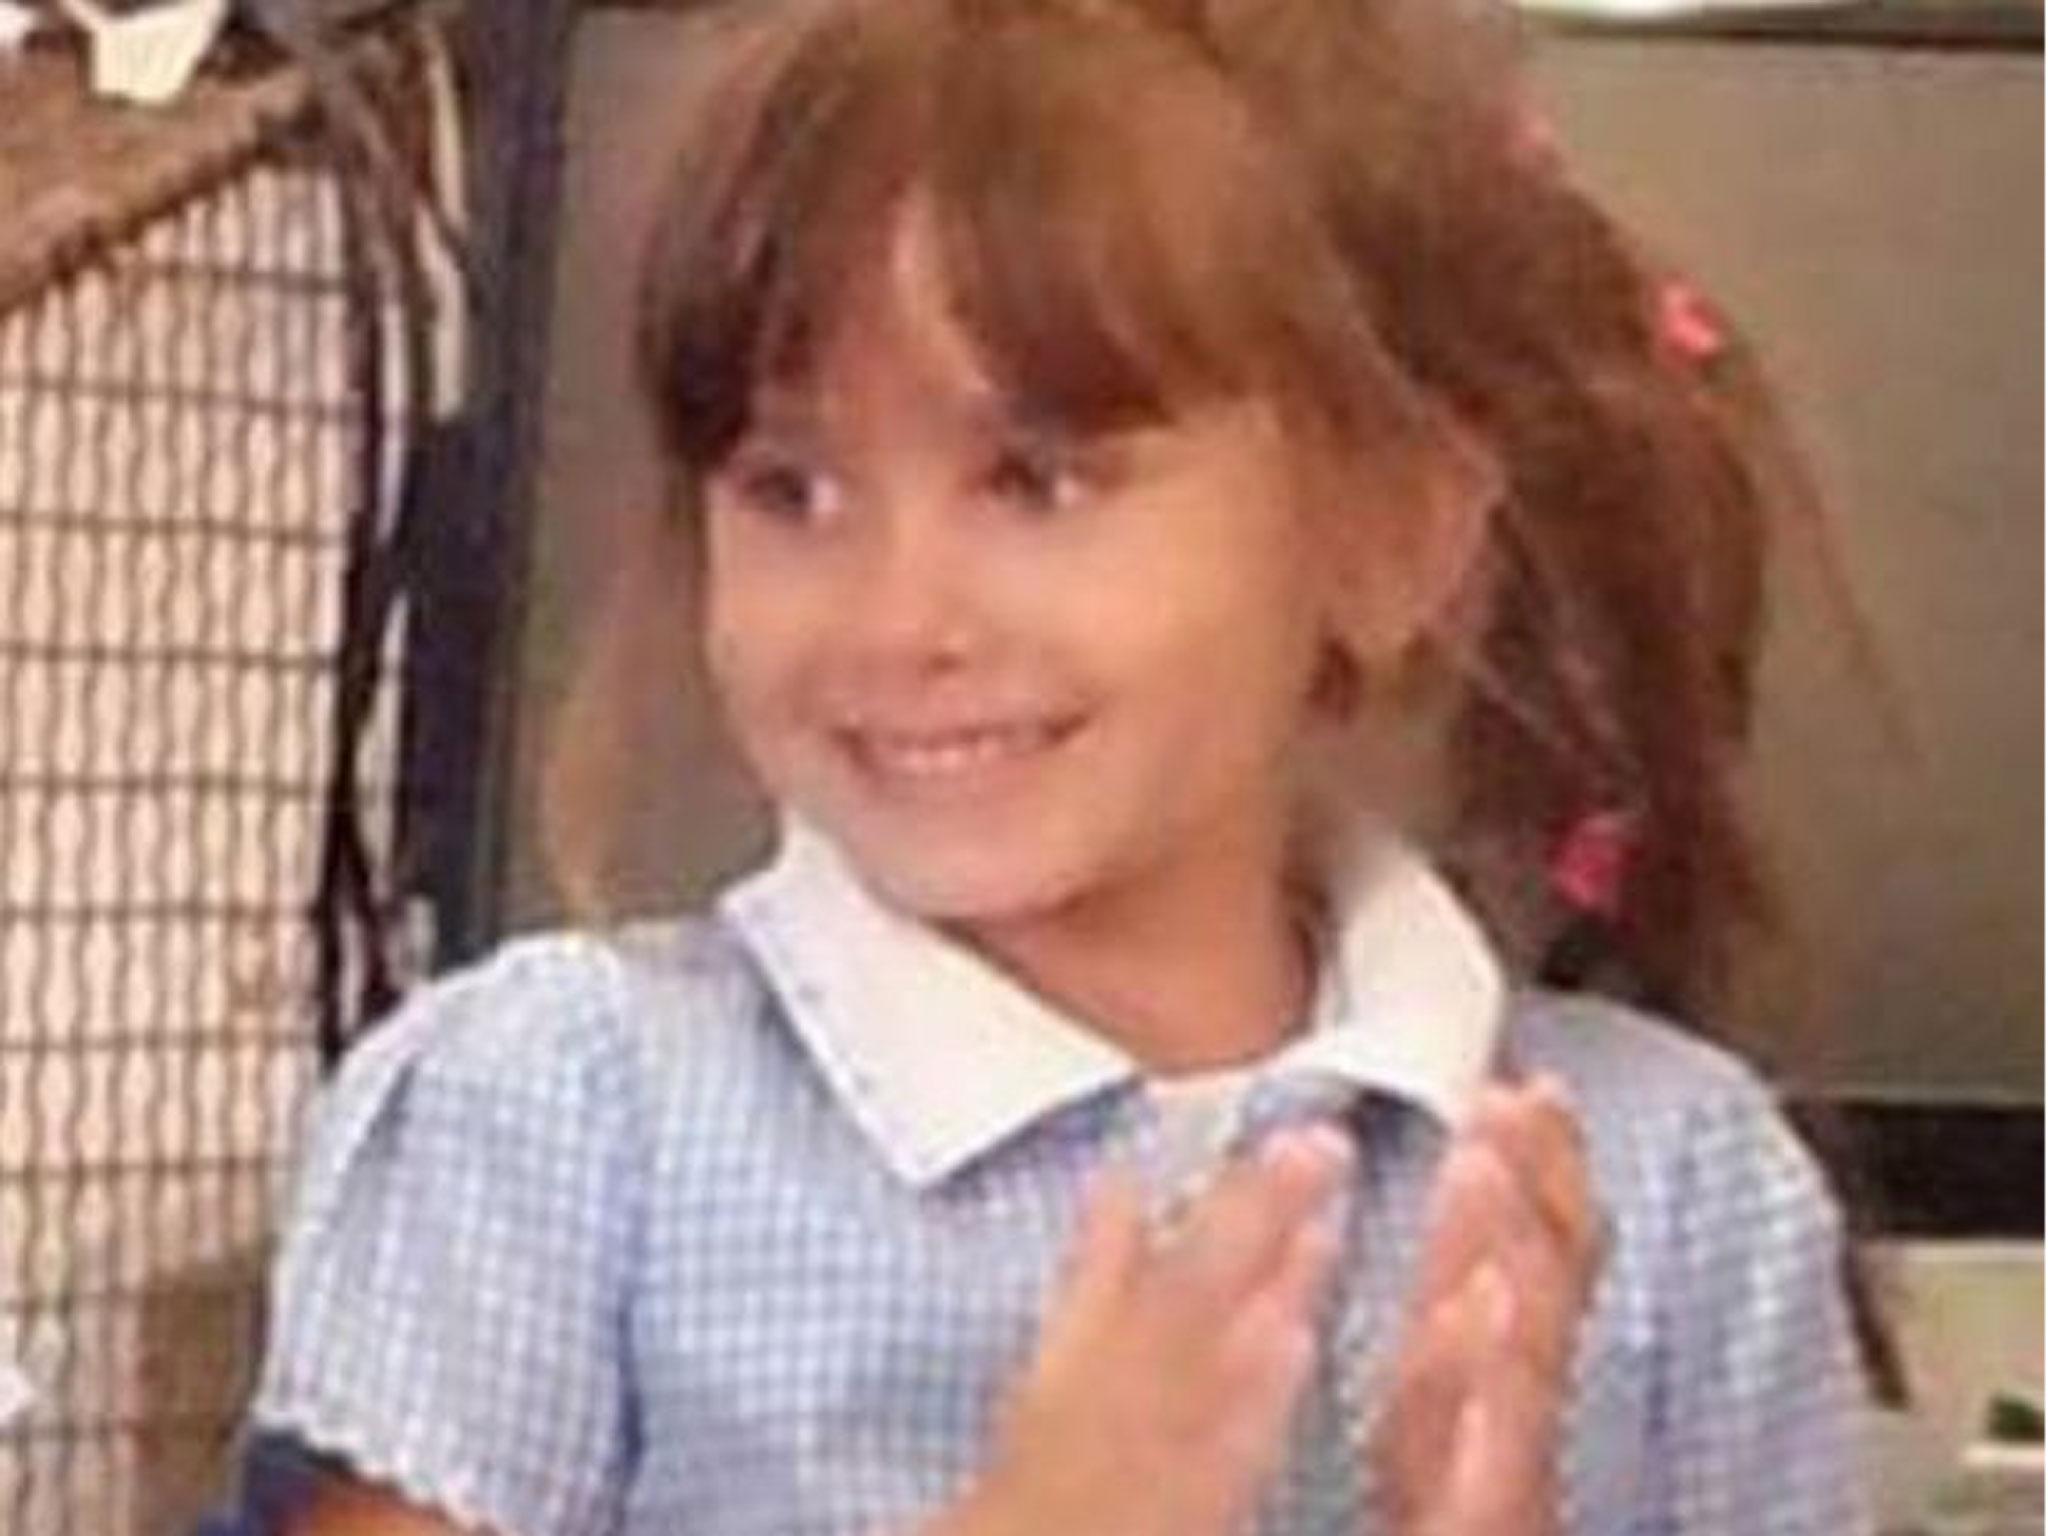 Katie Rough, described as a kind and thoughtful child, died in hospital late last year